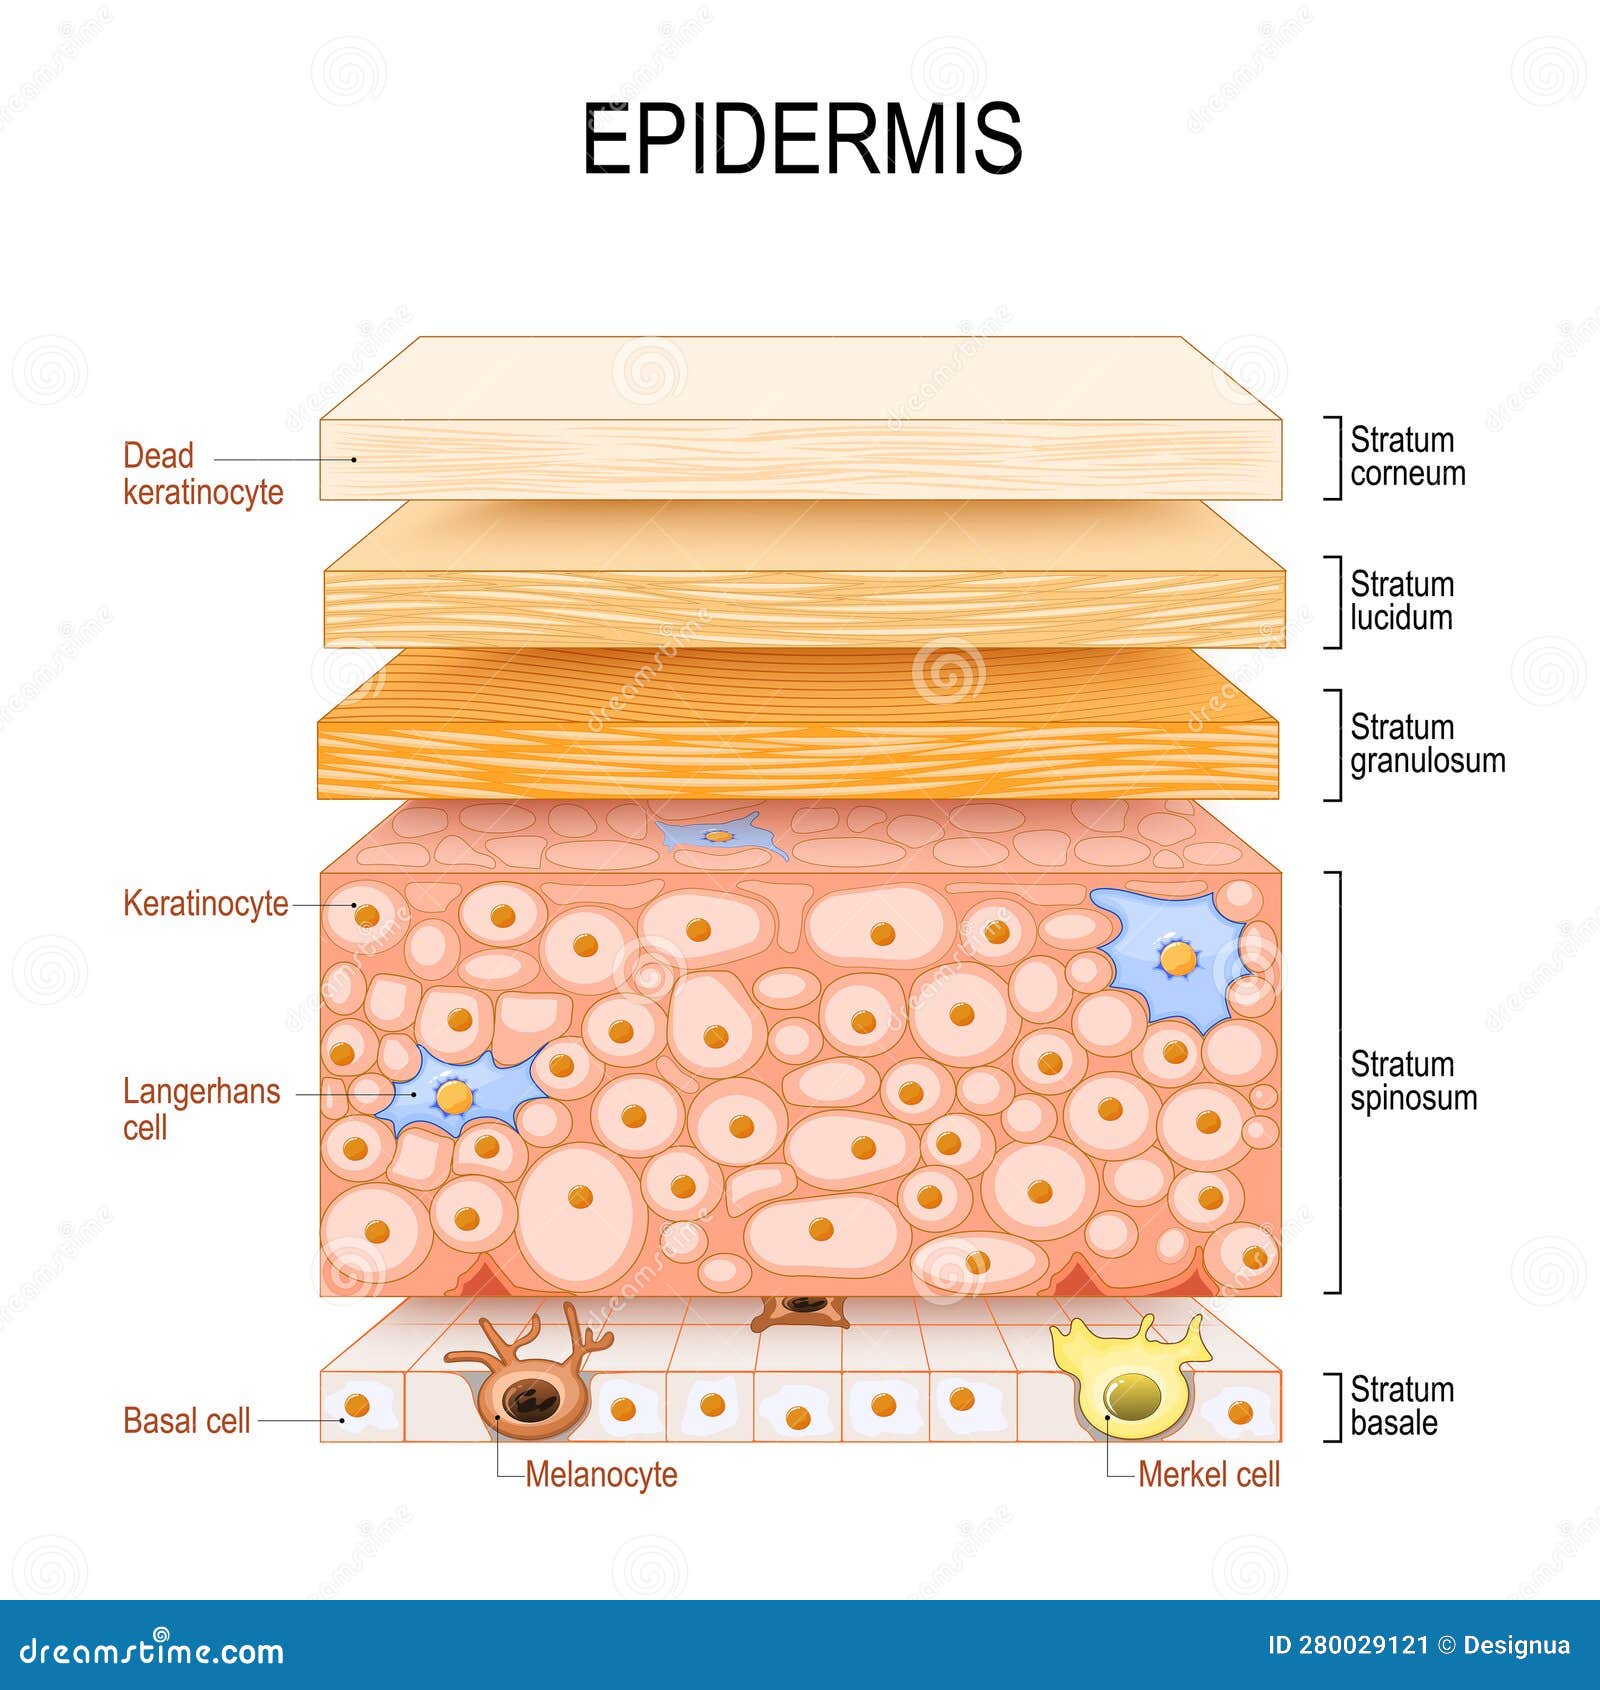 epidermis structure. skin anatomy. cell, and layers of a human skin